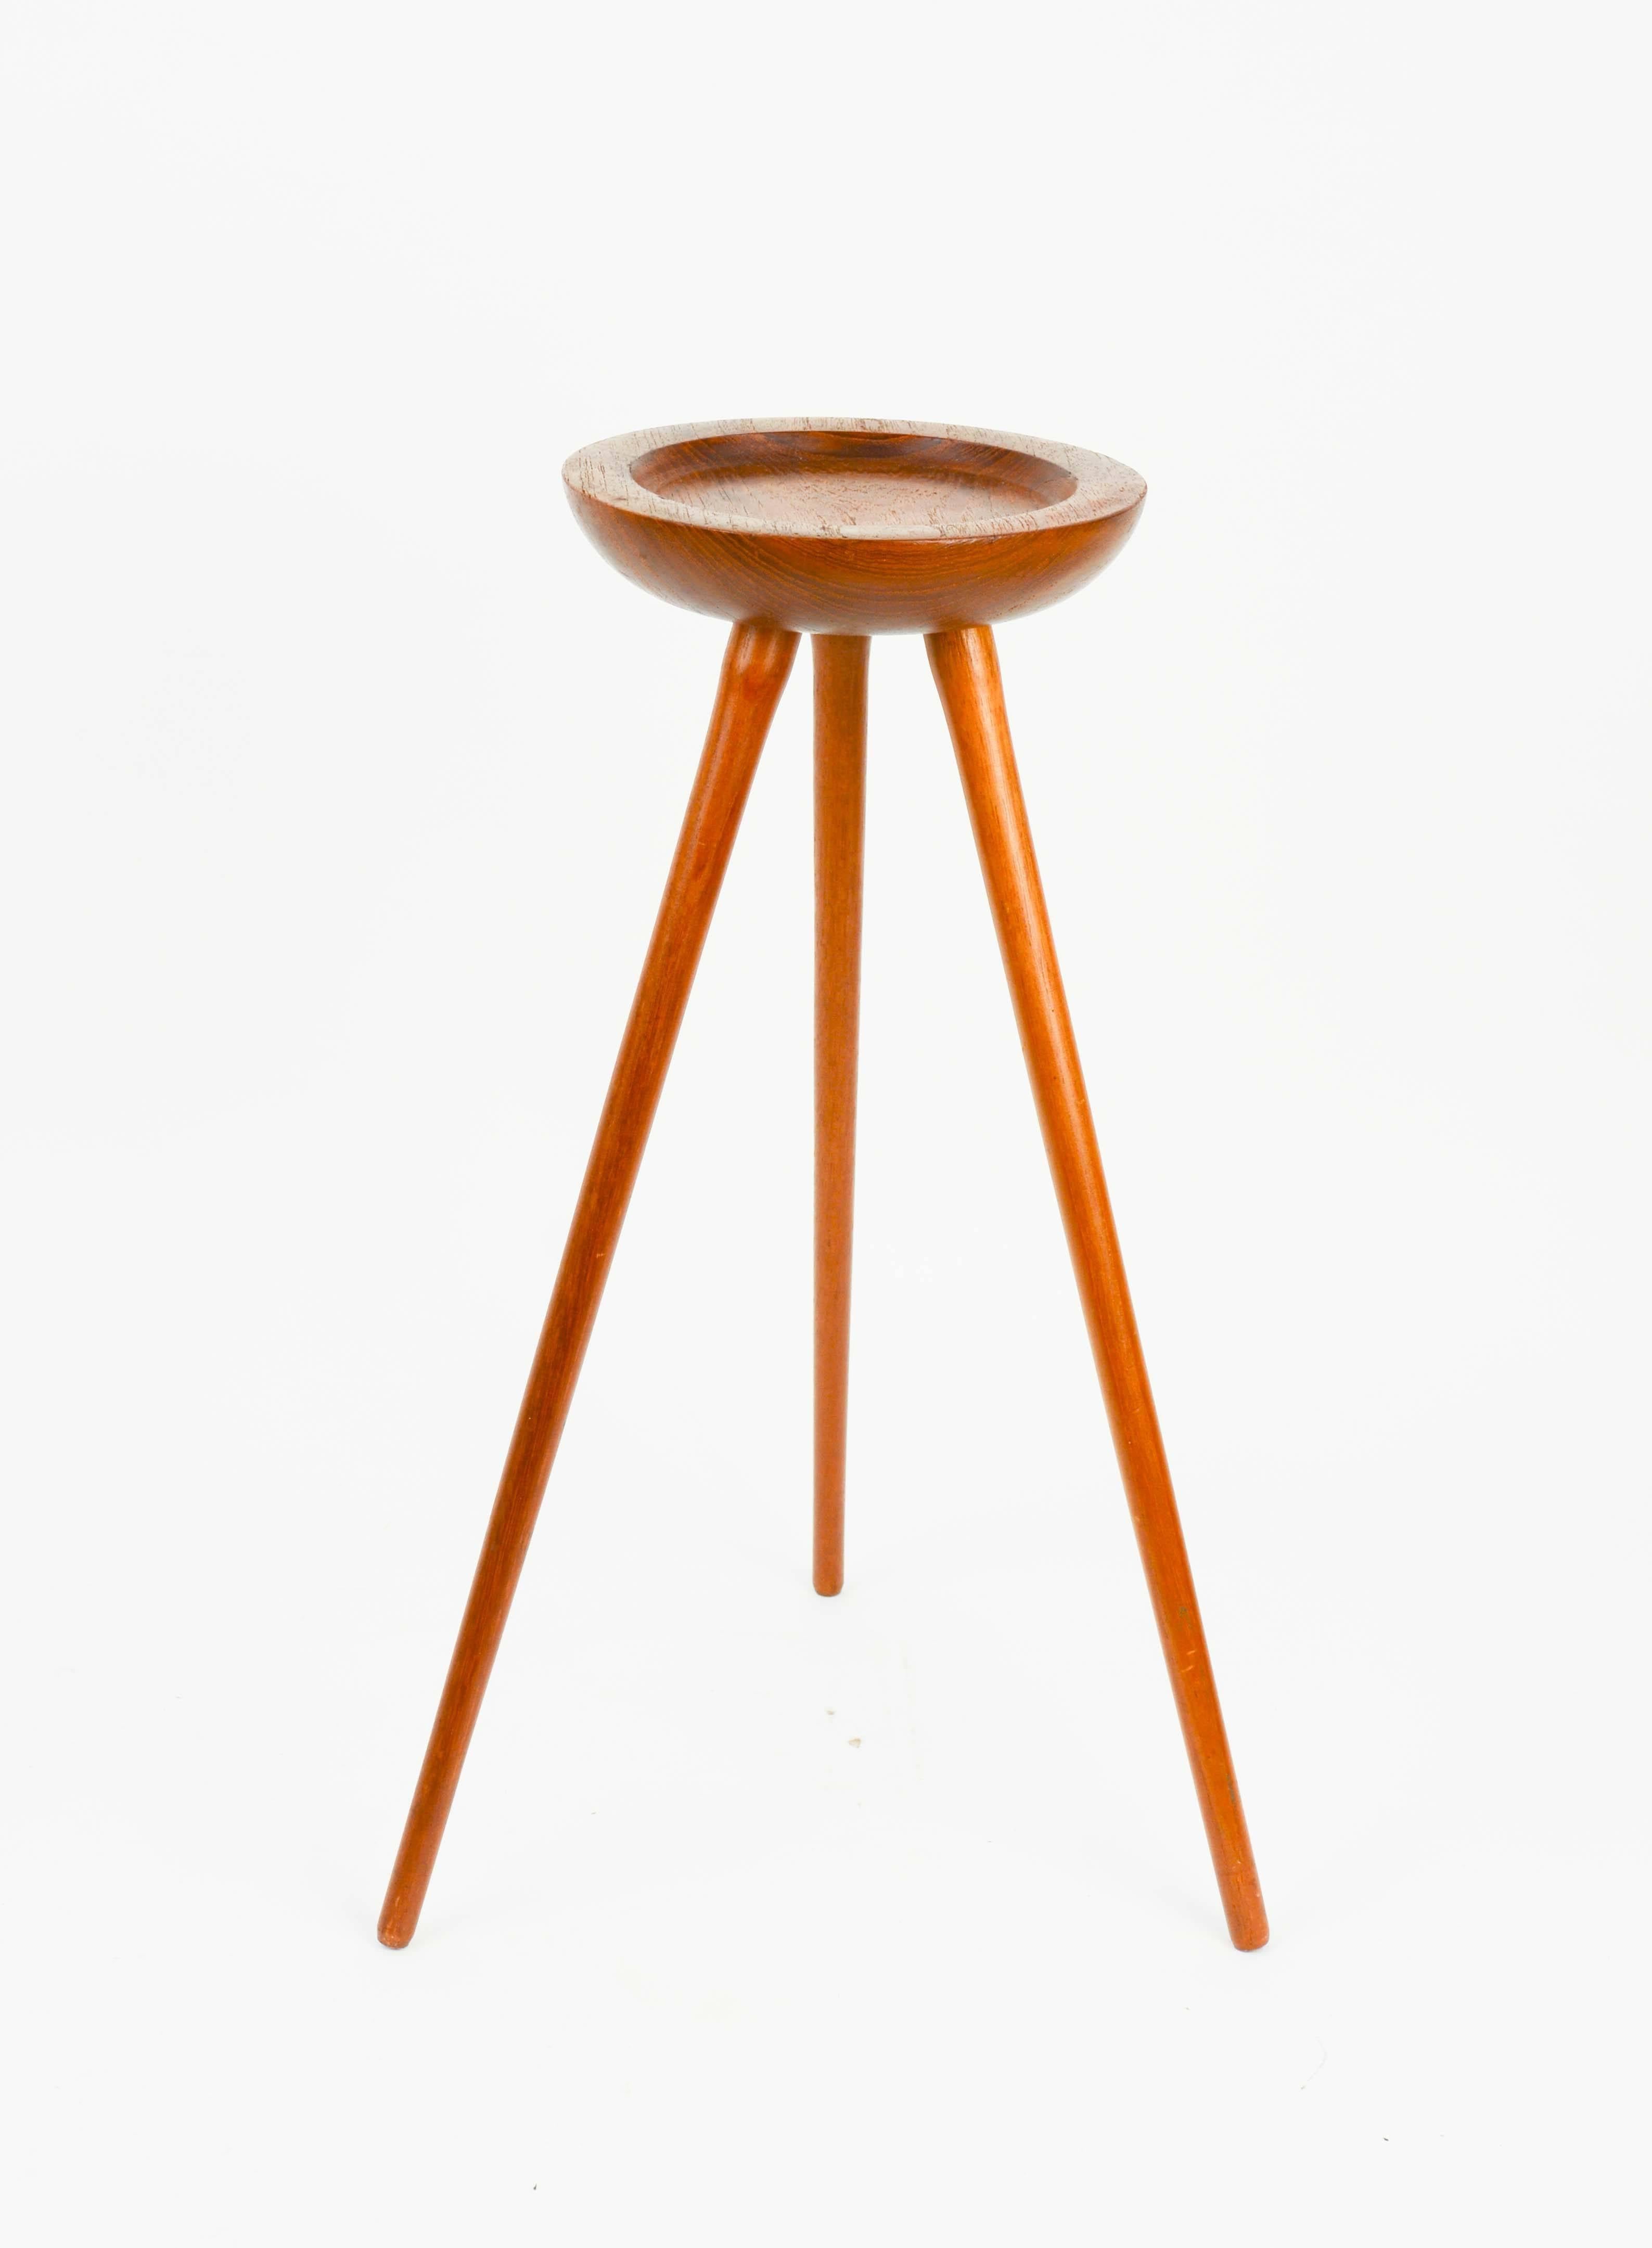 For the evening where you just want to rest and put your drink down. We have this tripod single cocktail table from Denmark in walnut.